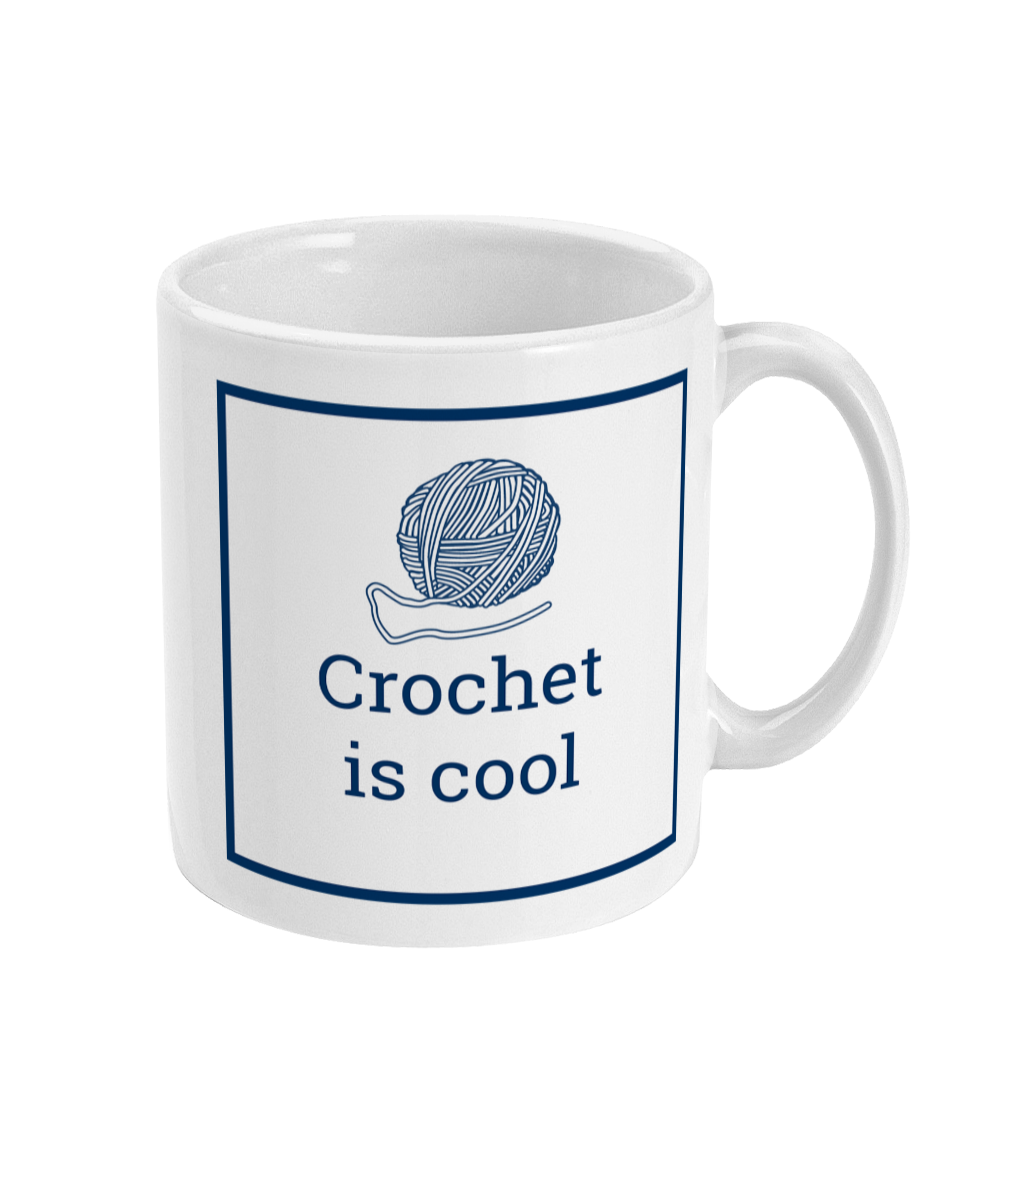 white mug with crochet is coll printed on it together with a ball of yarn